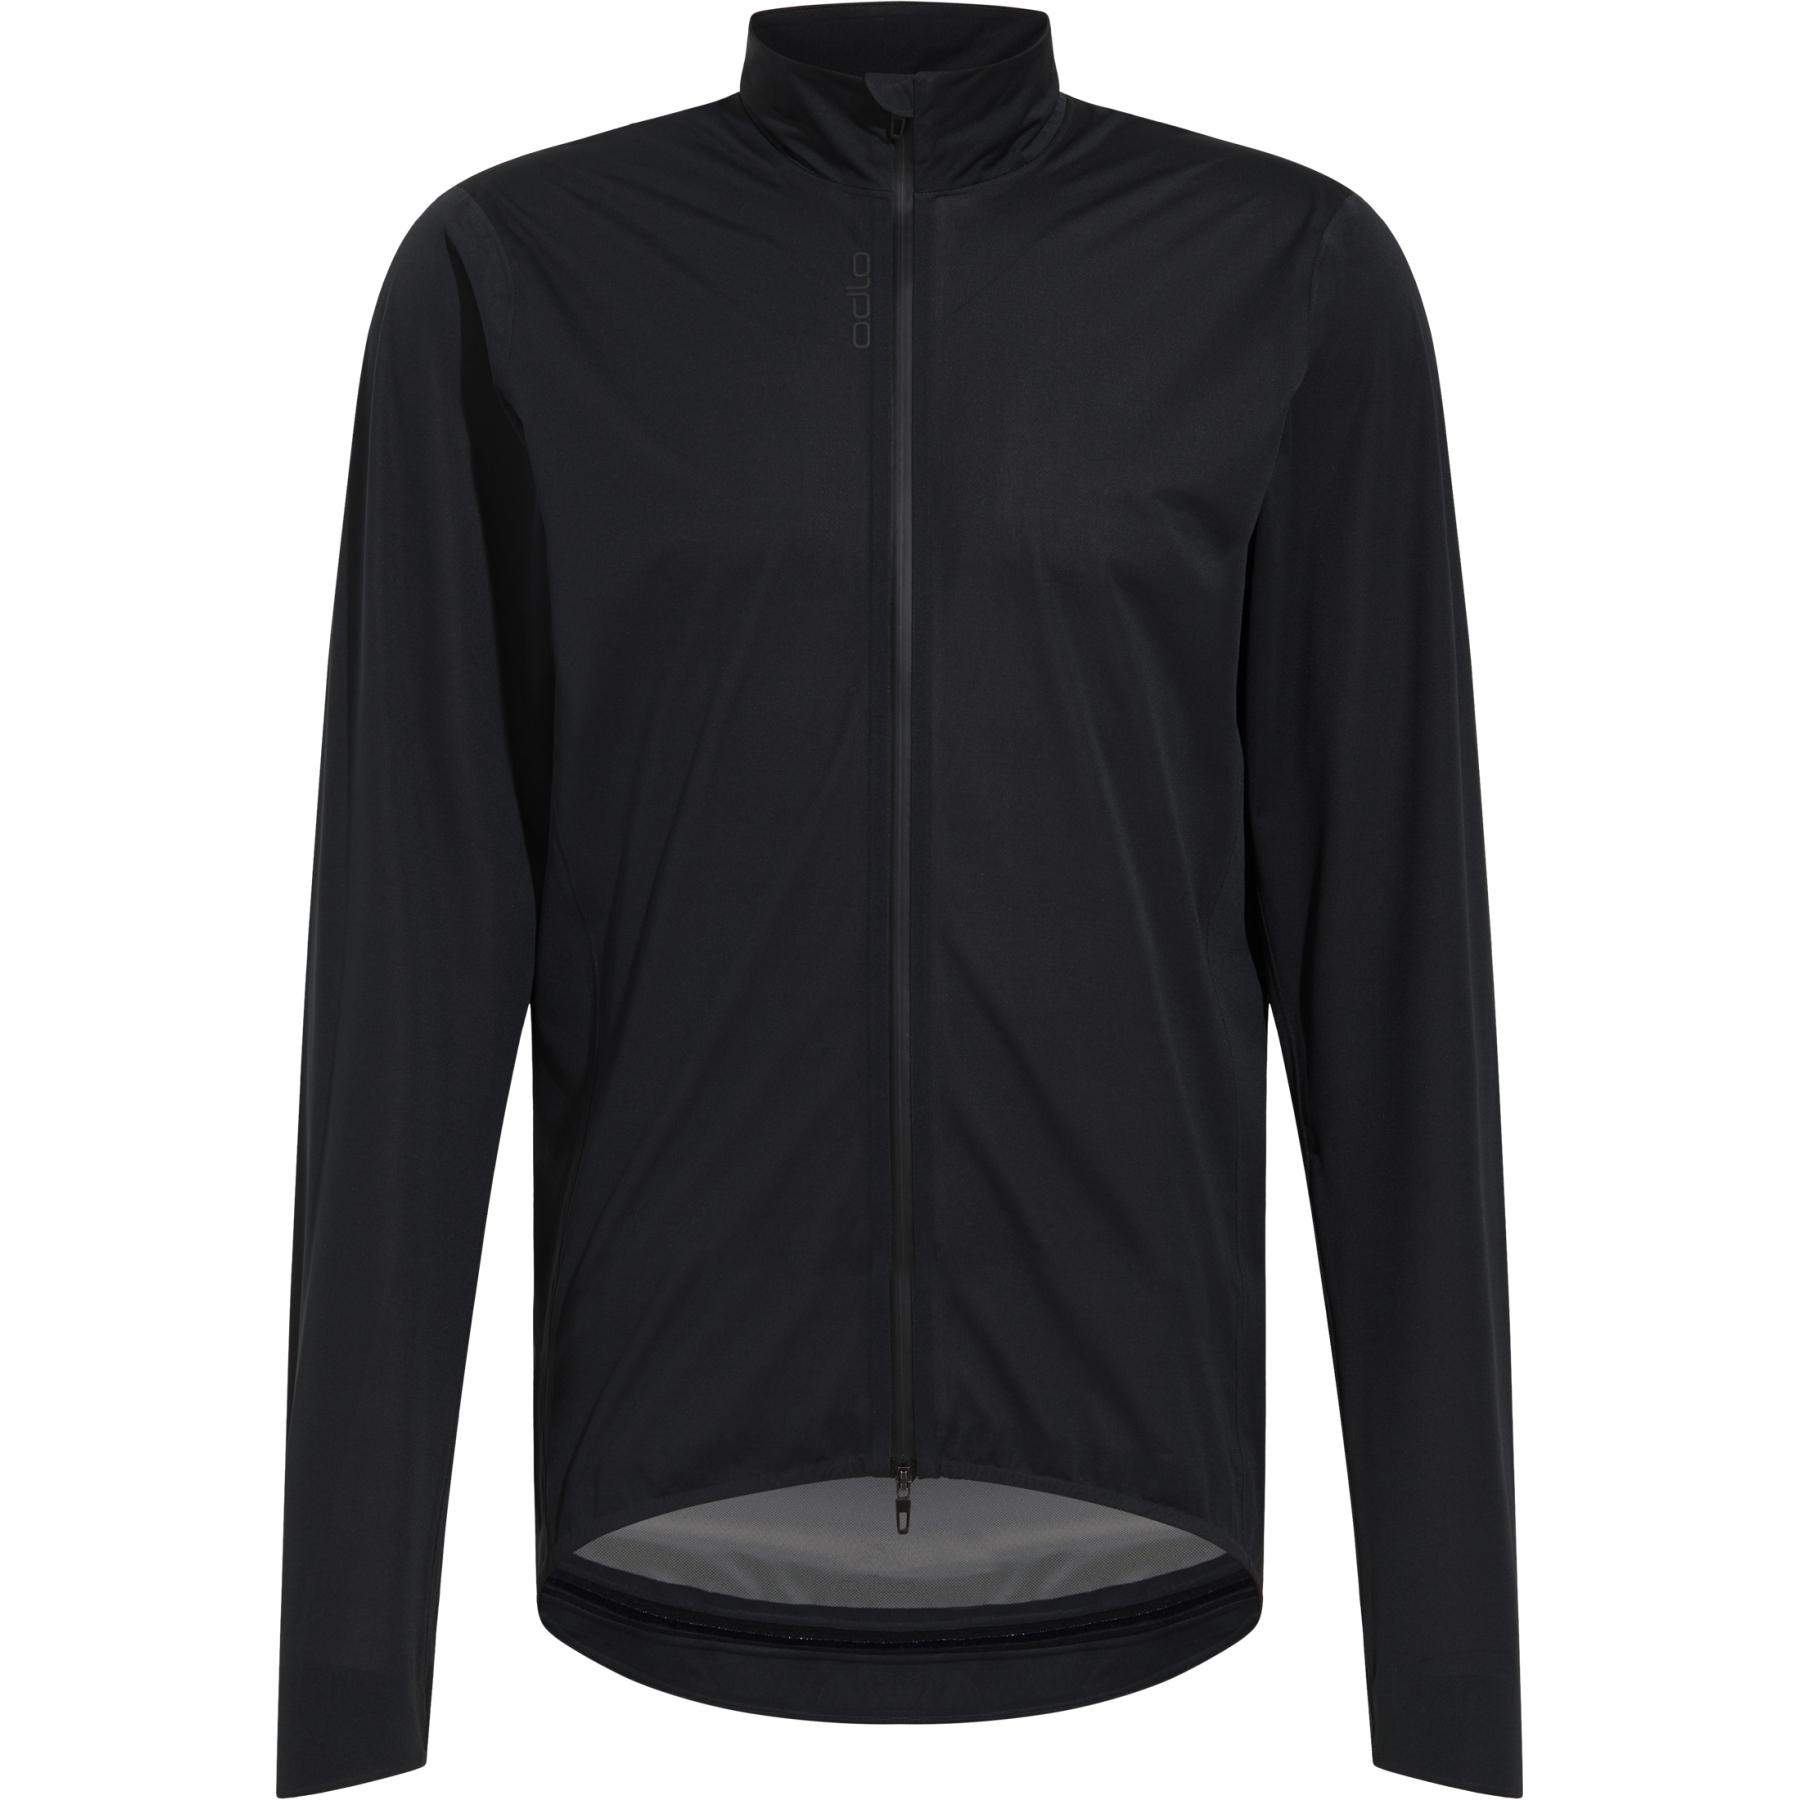 Picture of Odlo Zeroweight Performance Knit Cycling Rain Jacket Men - black